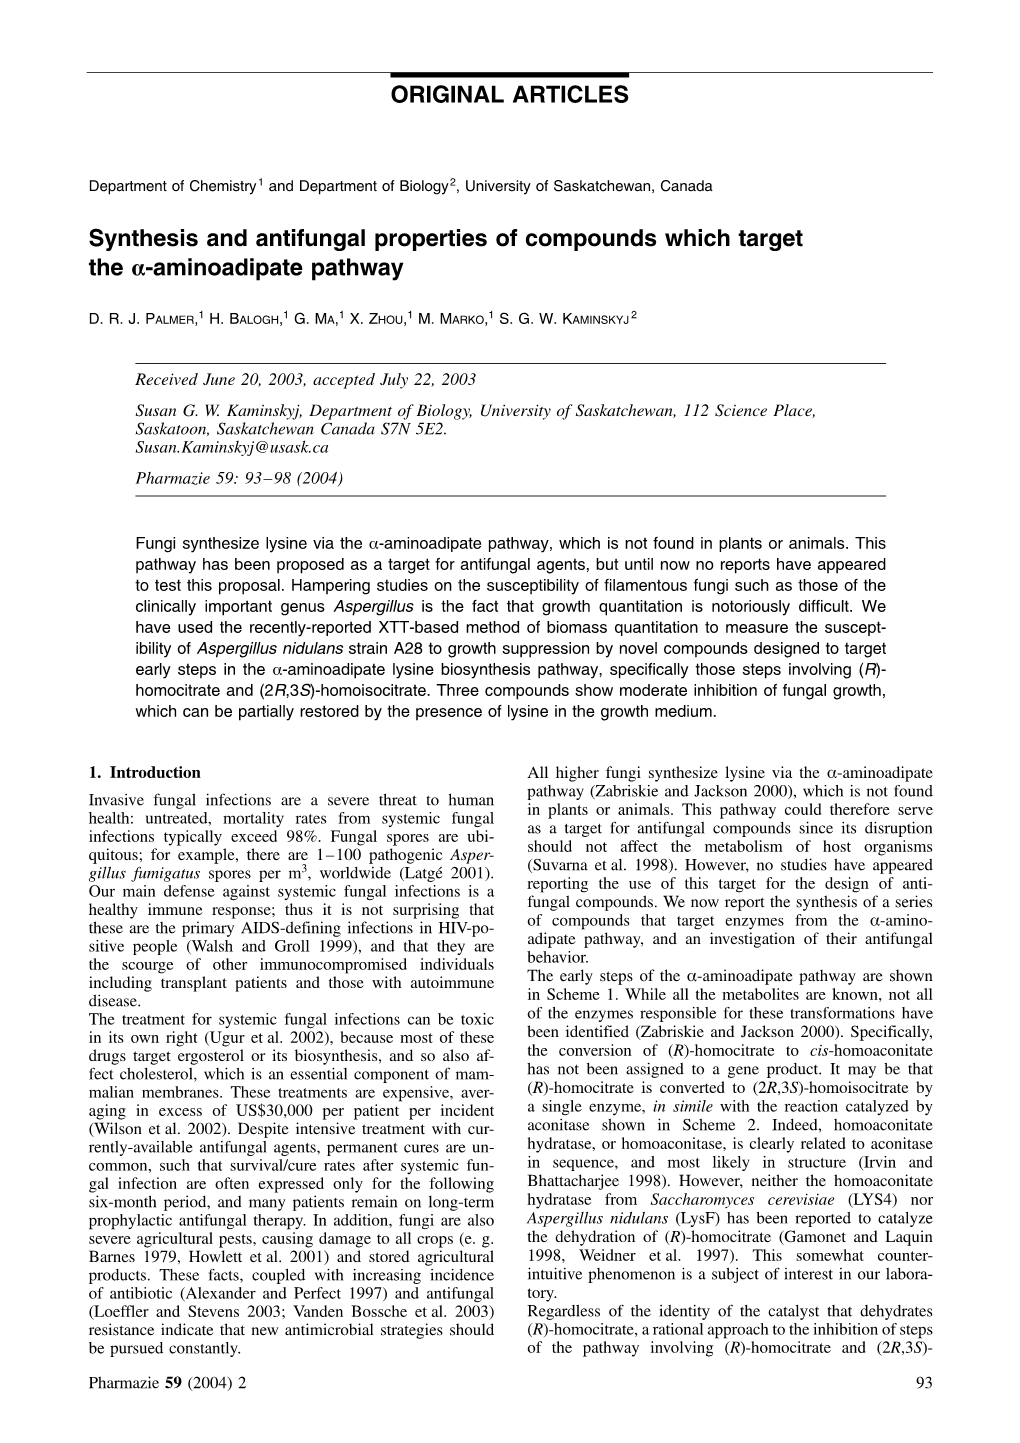 Synthesis and Antifungal Properties of Compounds Which Target the Α-Aminoadipate Pathway ORIGINAL ARTICLES